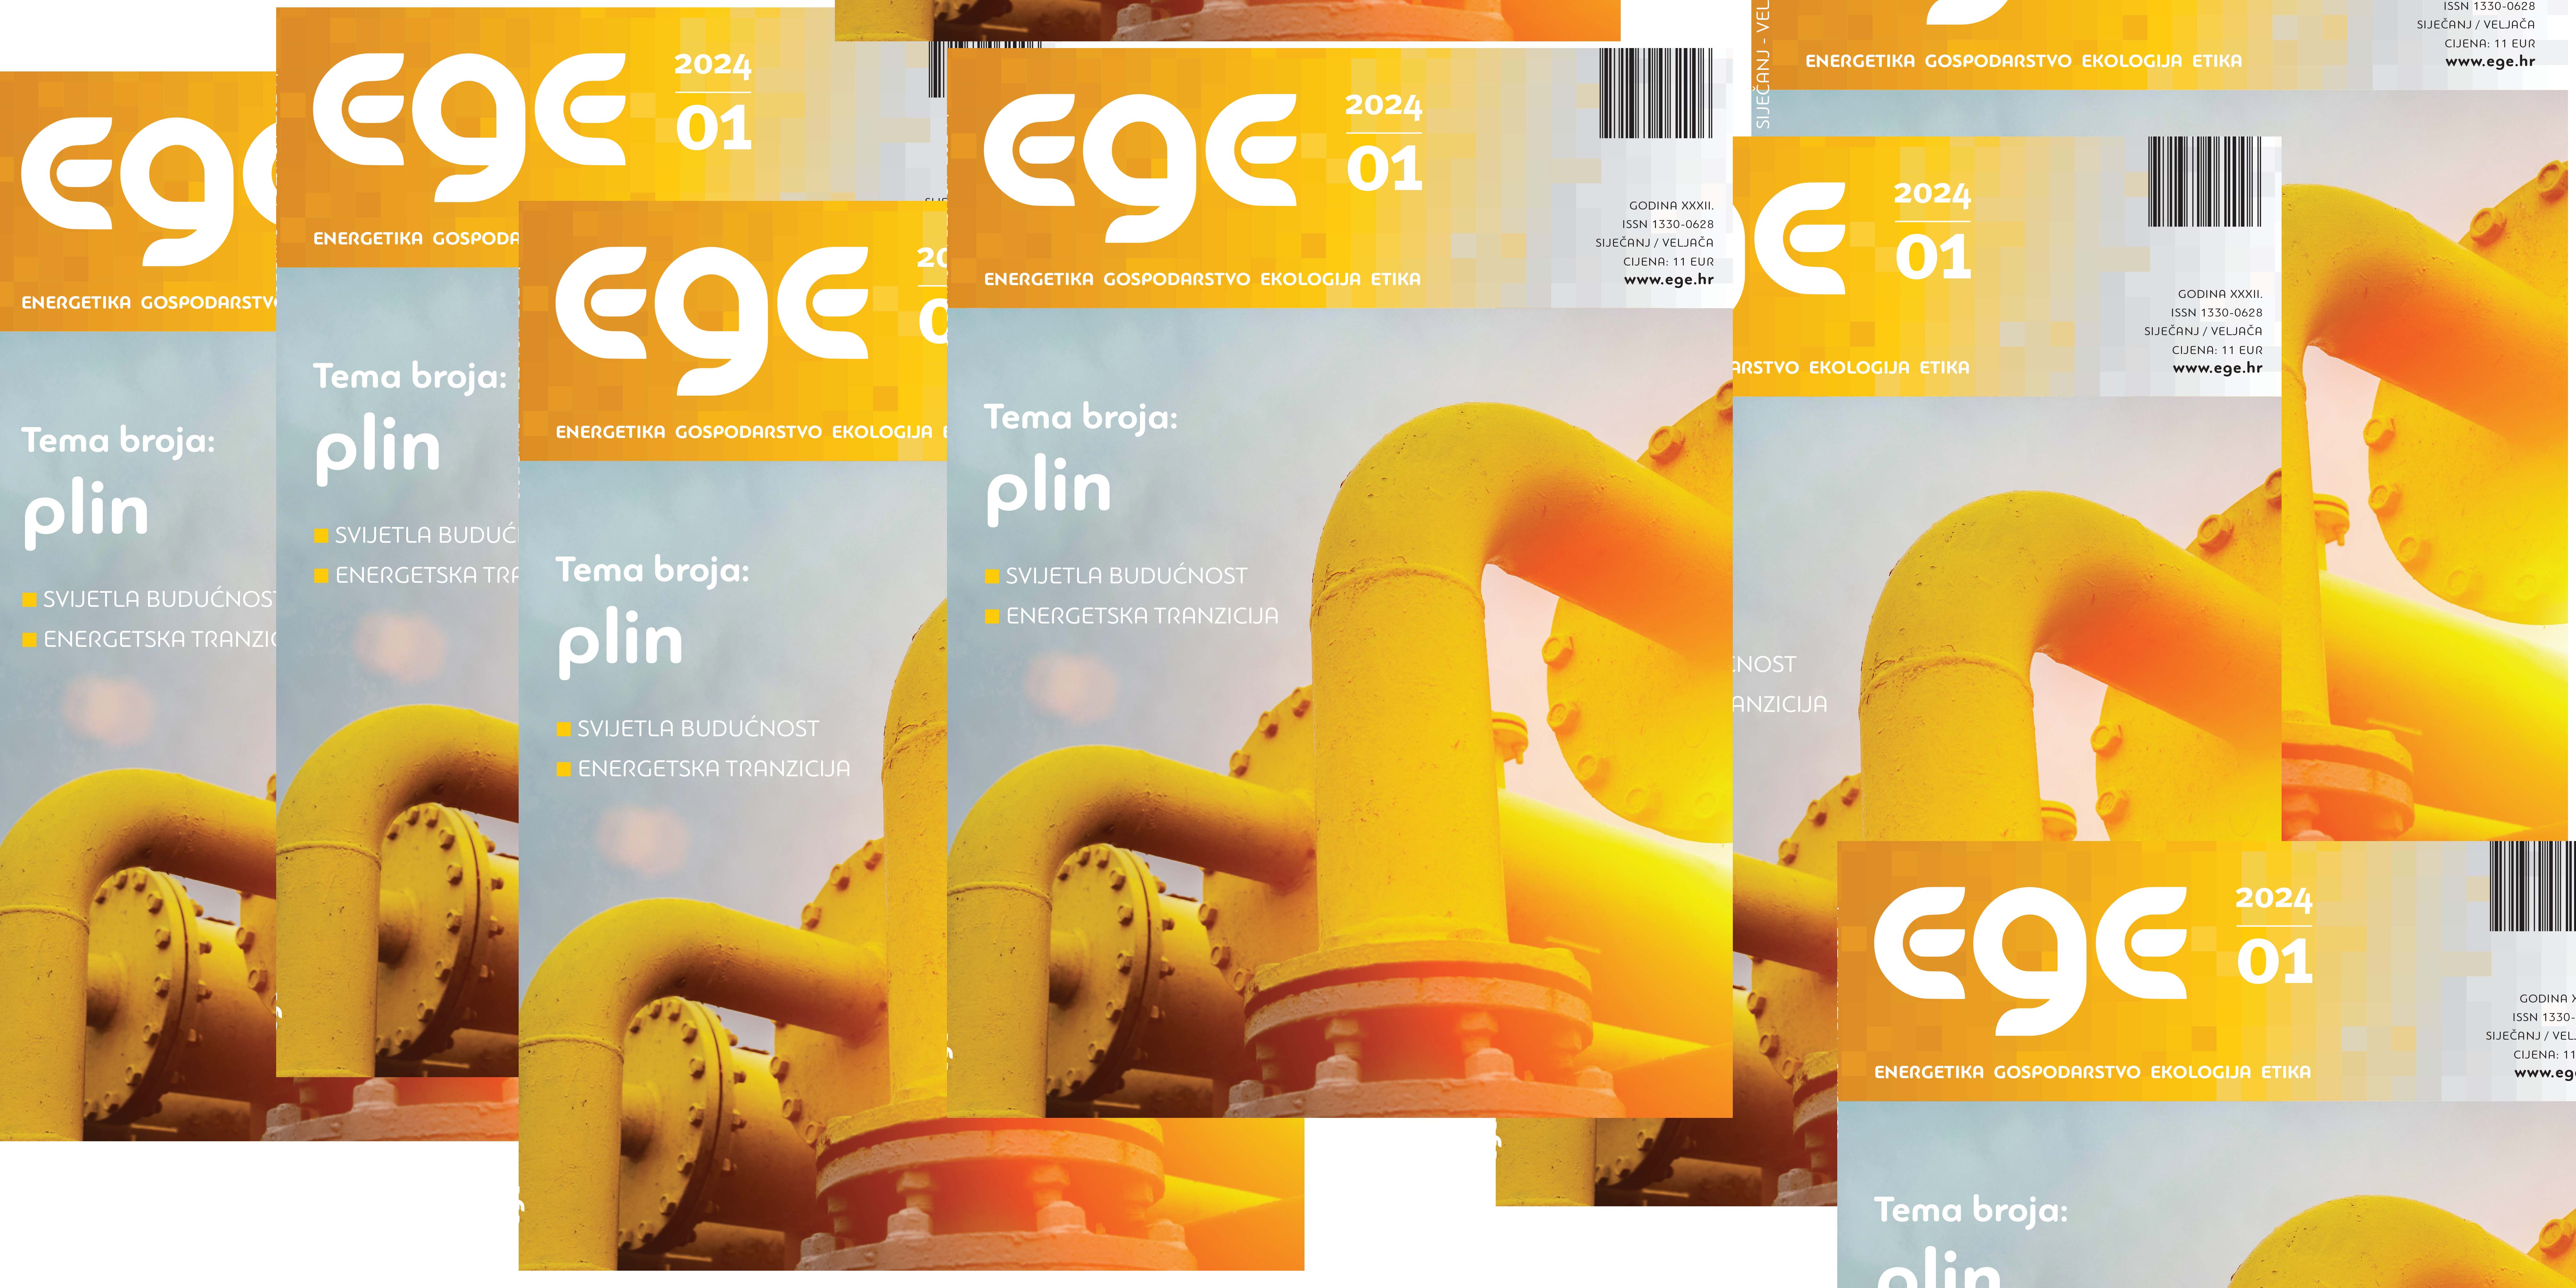 New Issue of EGE Magazine has Just Arrived